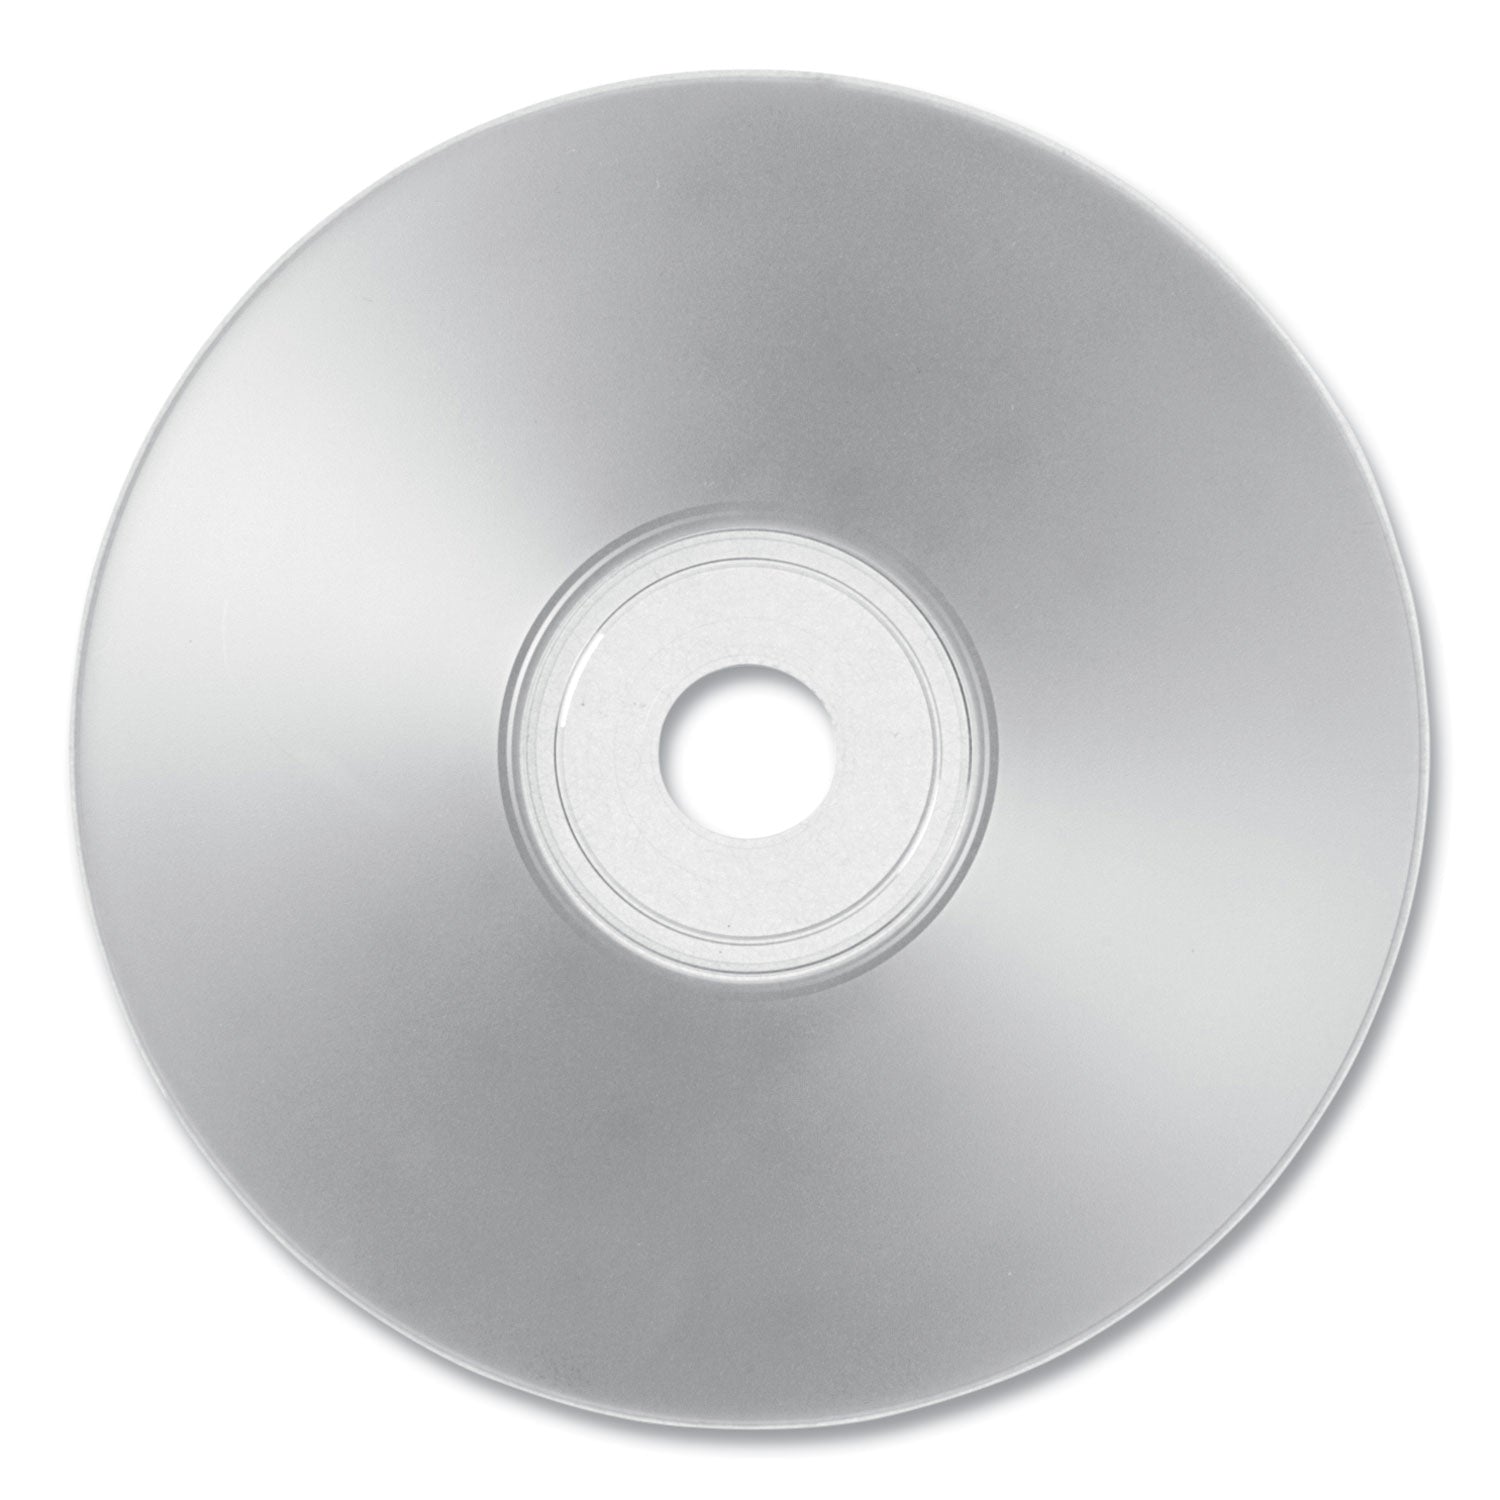 CD-R Printable Recordable Disc, 700 MB/80 min, 52x, Spindle, Silver, 100/Pack - 